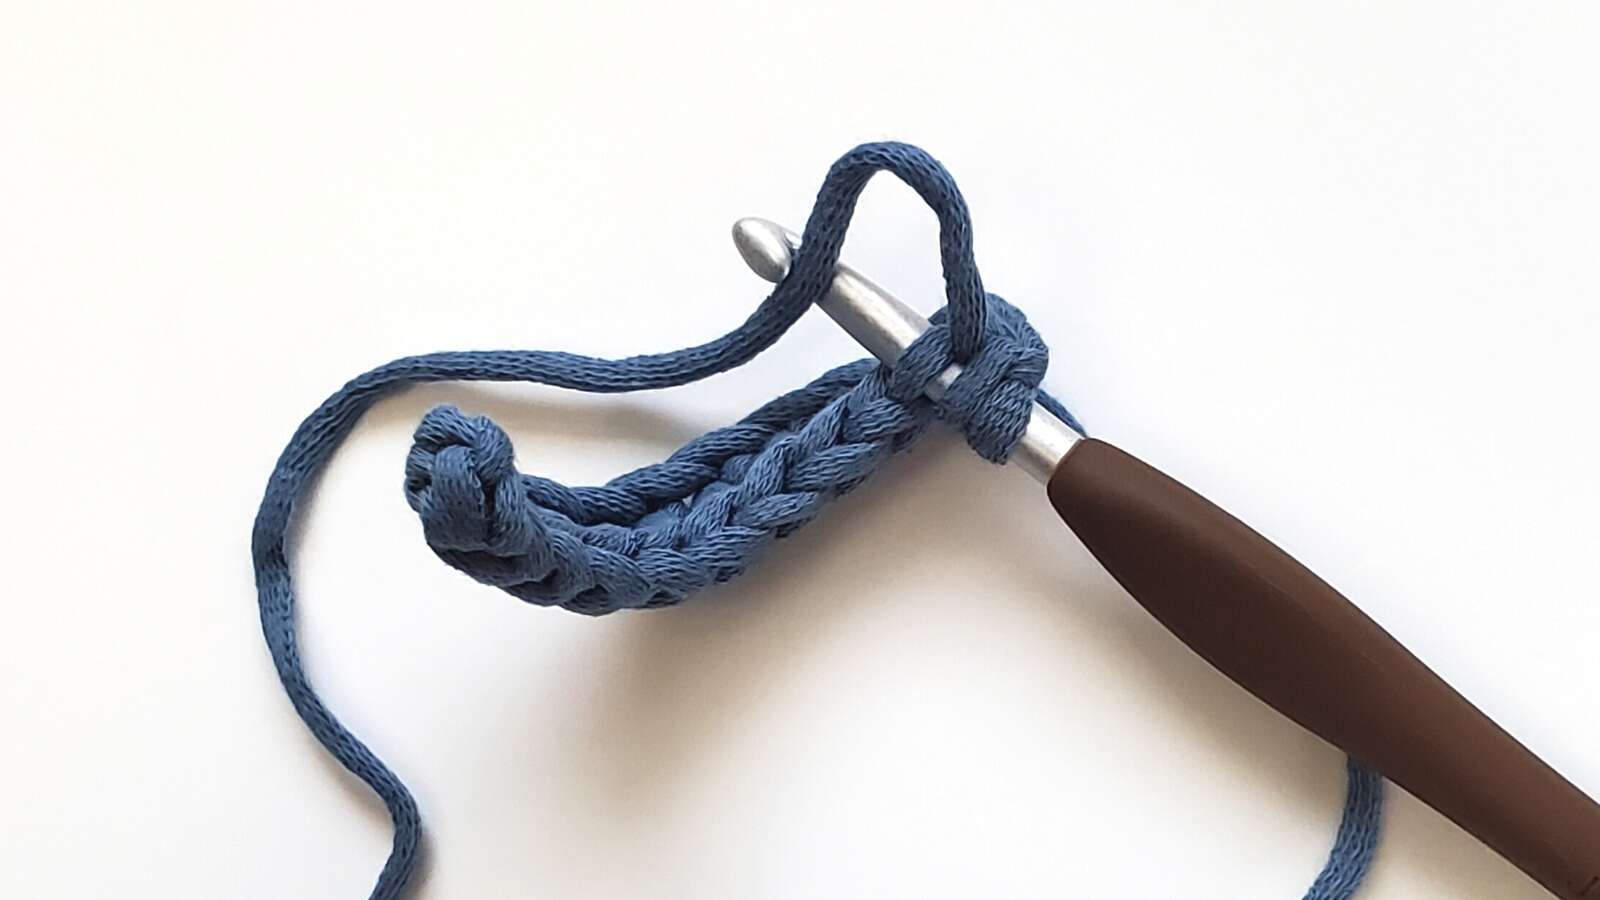 Crochet hook inserted under just the front loop of the stitch when makeing a half double crochet front loop only